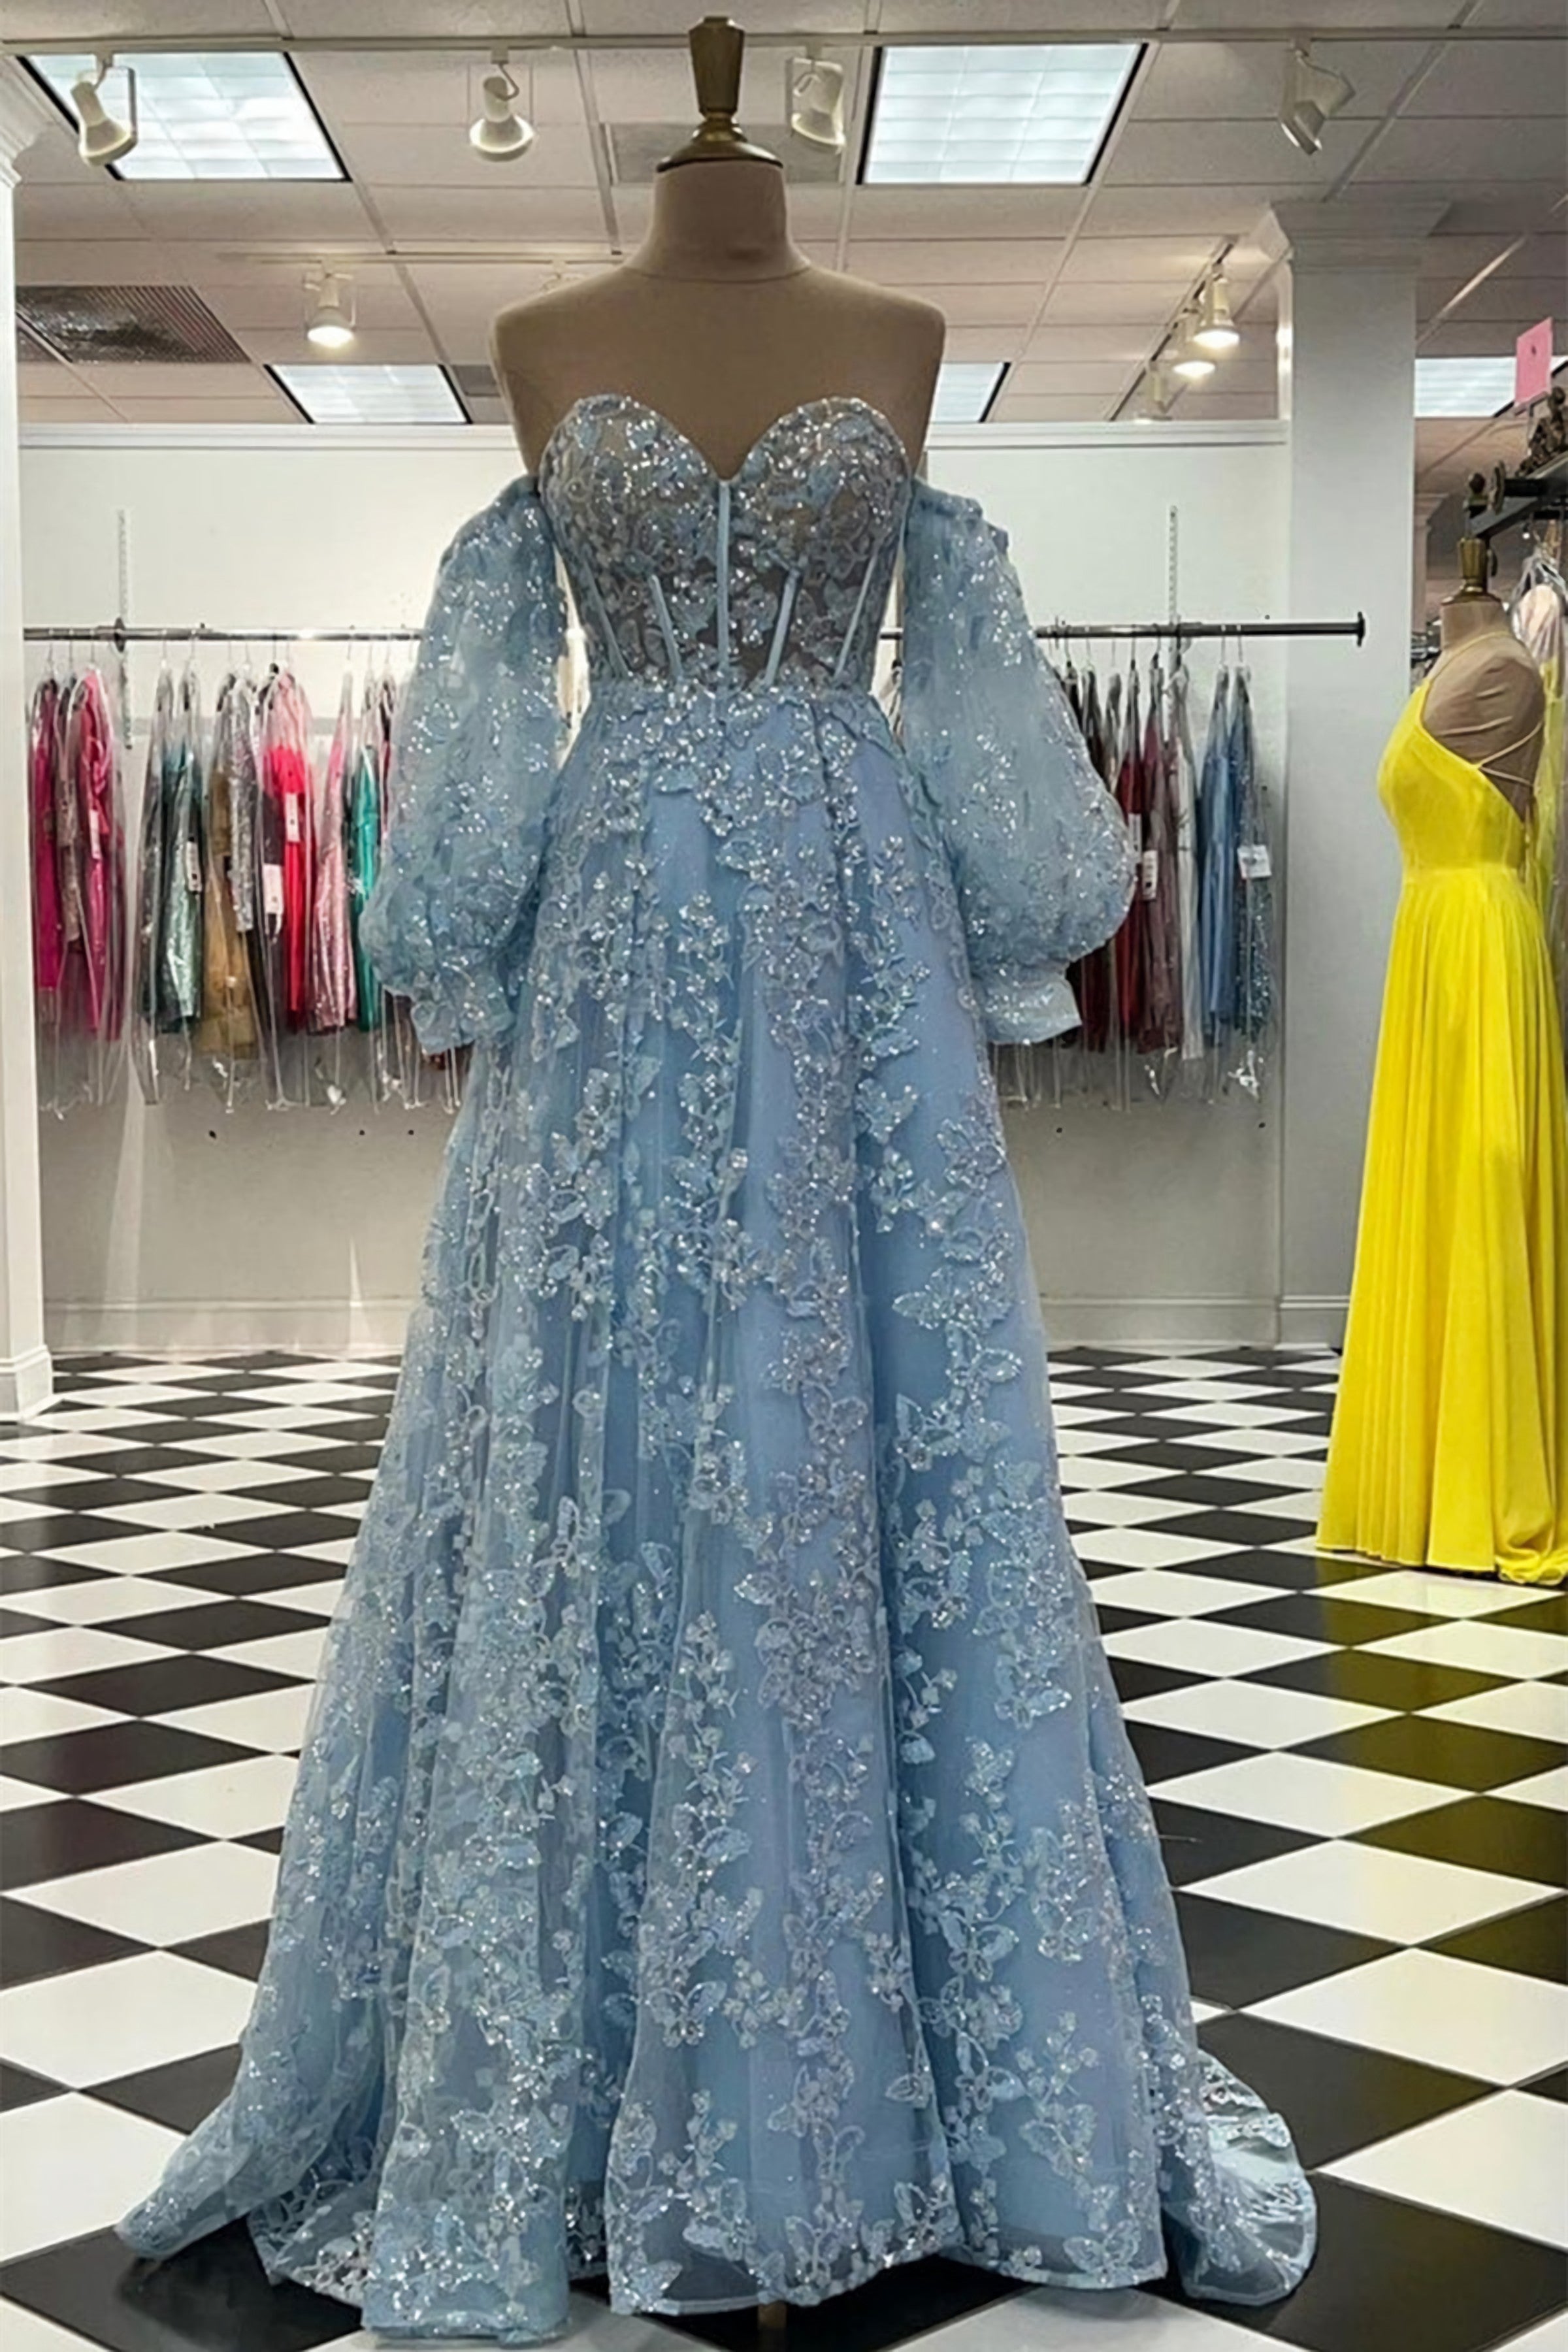 Sweetheart Neck Blue Lace Appliques Long Prom Dress, With Long Sleeves Blue Lace Floral Formal Graduation Evening Dress